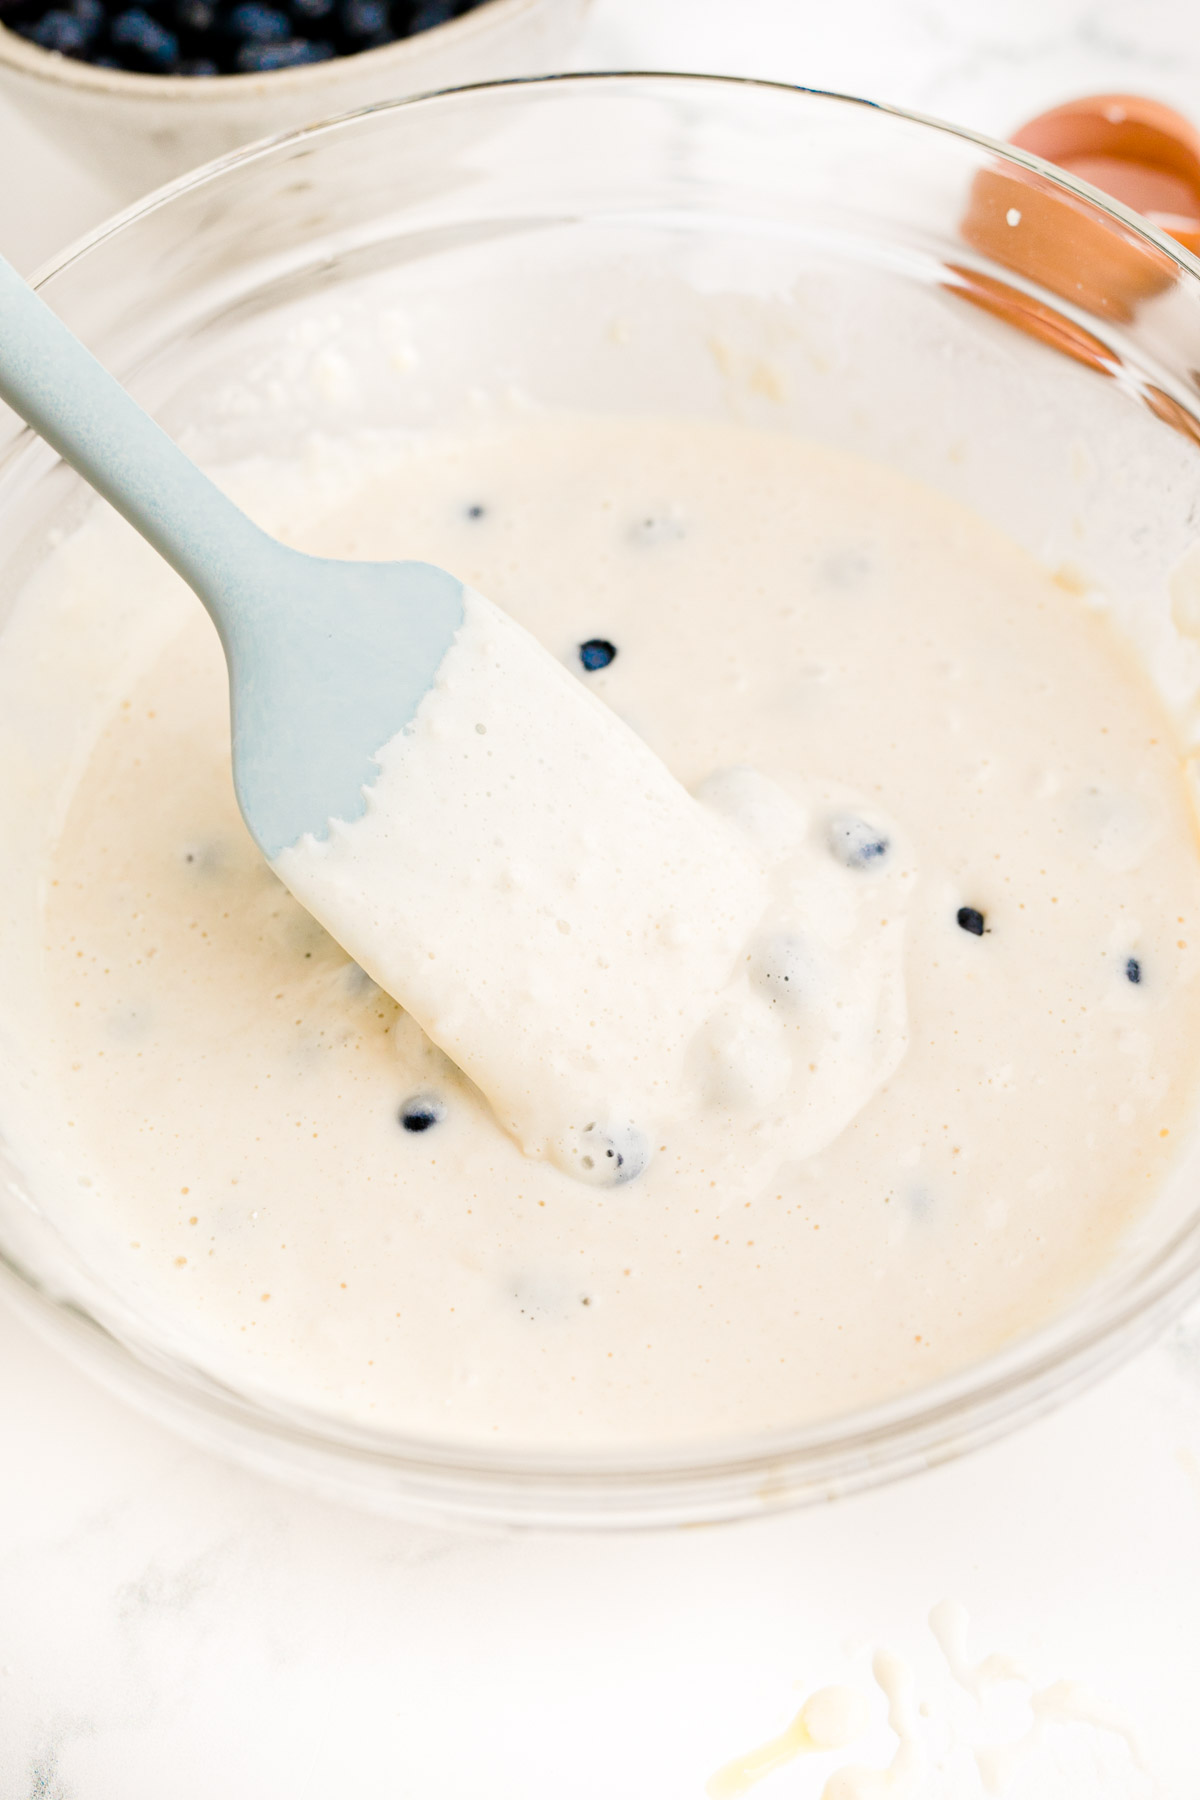 Blueberry pancake batter in a glass mixing bowl with a blue rubber spatula.